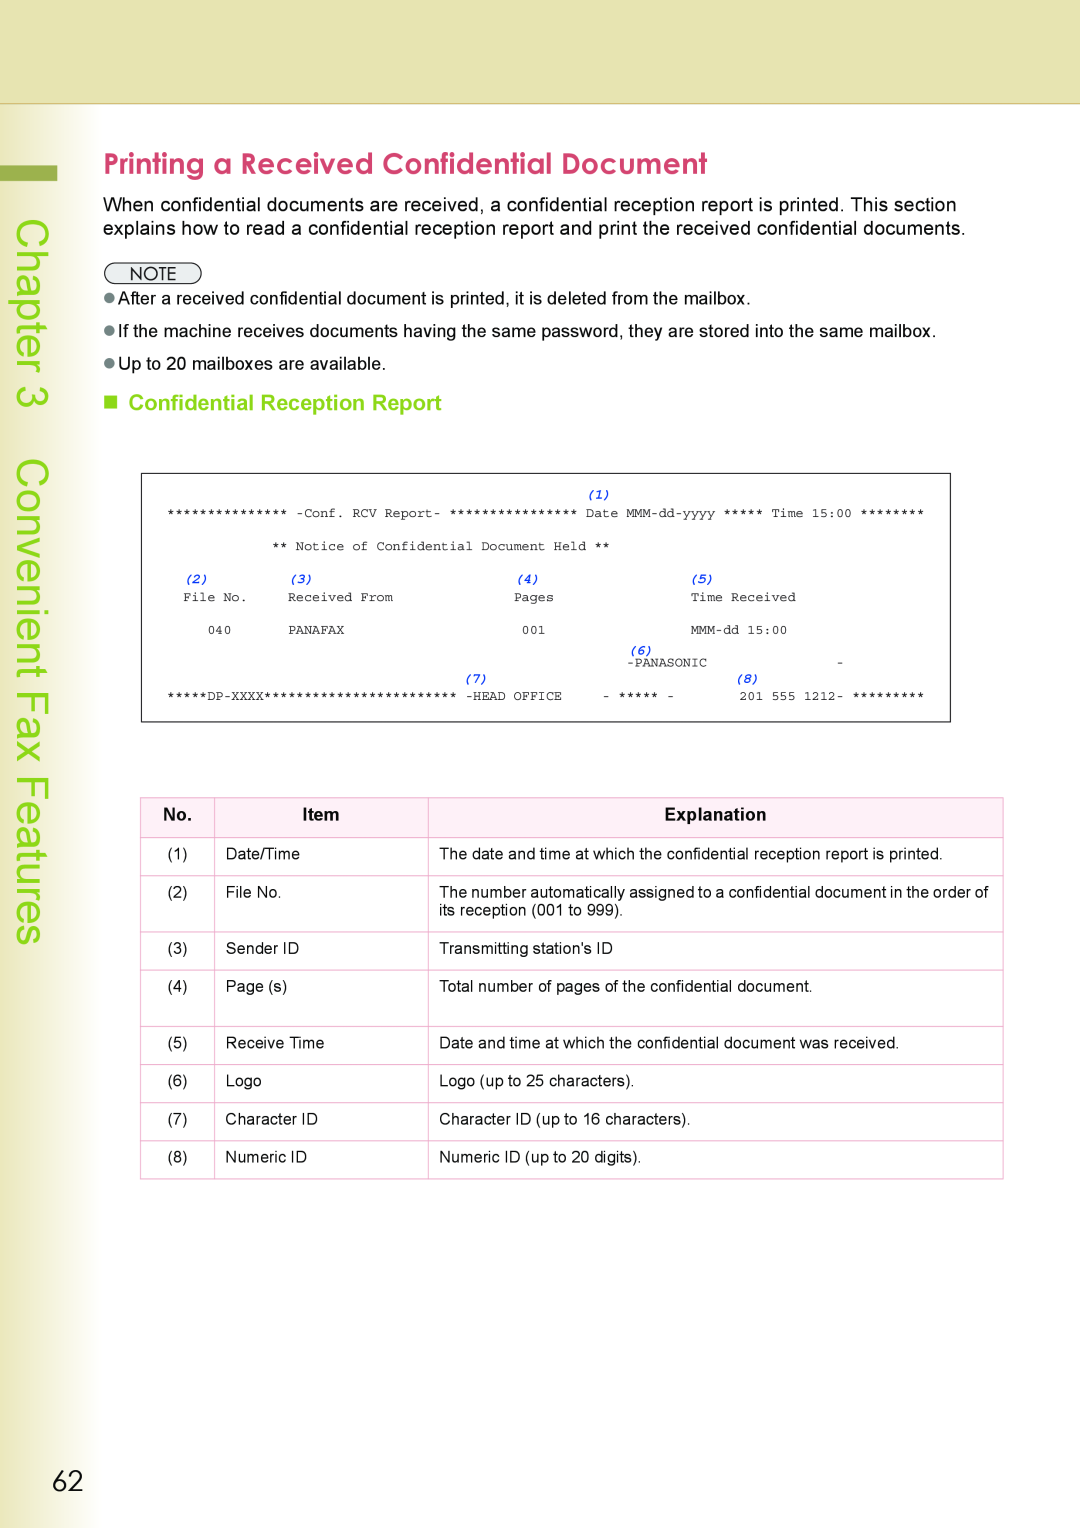 Philips DP-C262 manual Printing a Received Confidential Document, „ Confidential Reception Report, Convenient Fax Features 